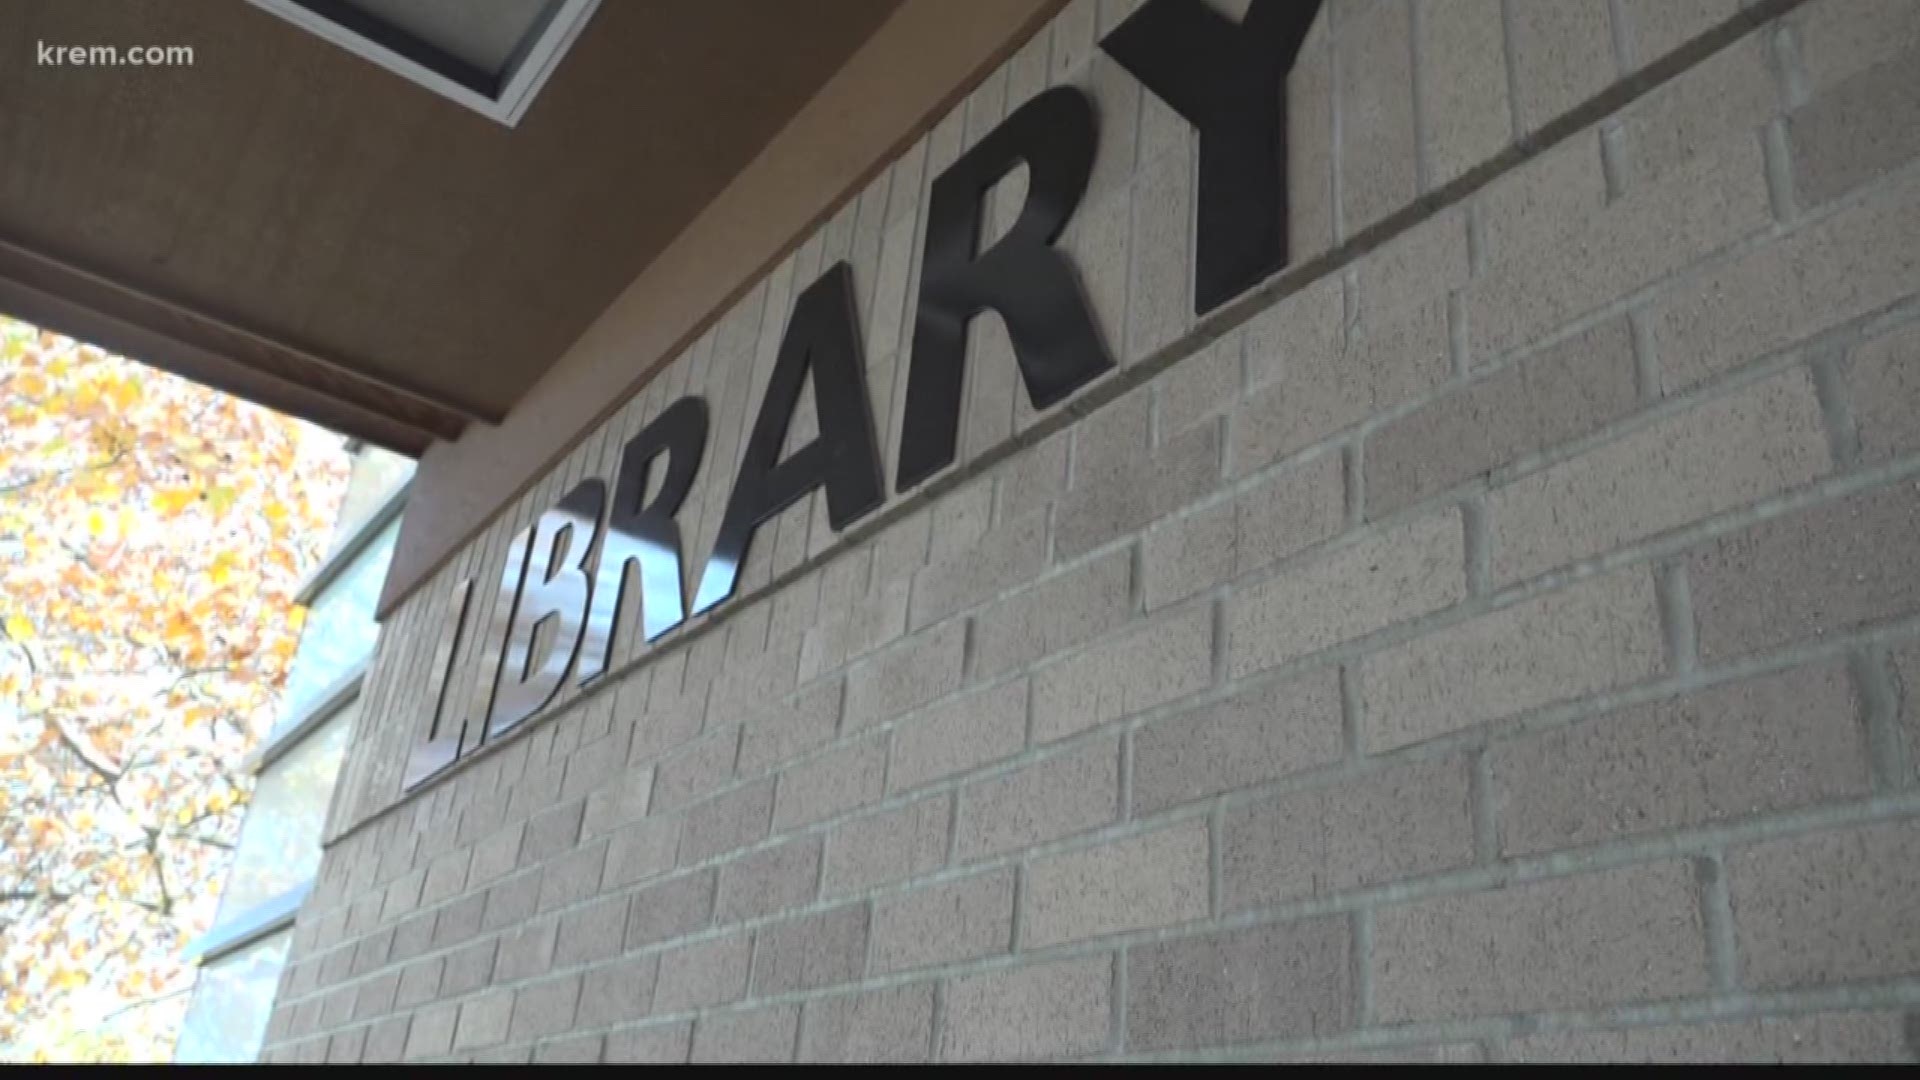 KREM Reporter Tim Pham spoke with librarians with the SPS about what their future looks like after layoffs district-wide.